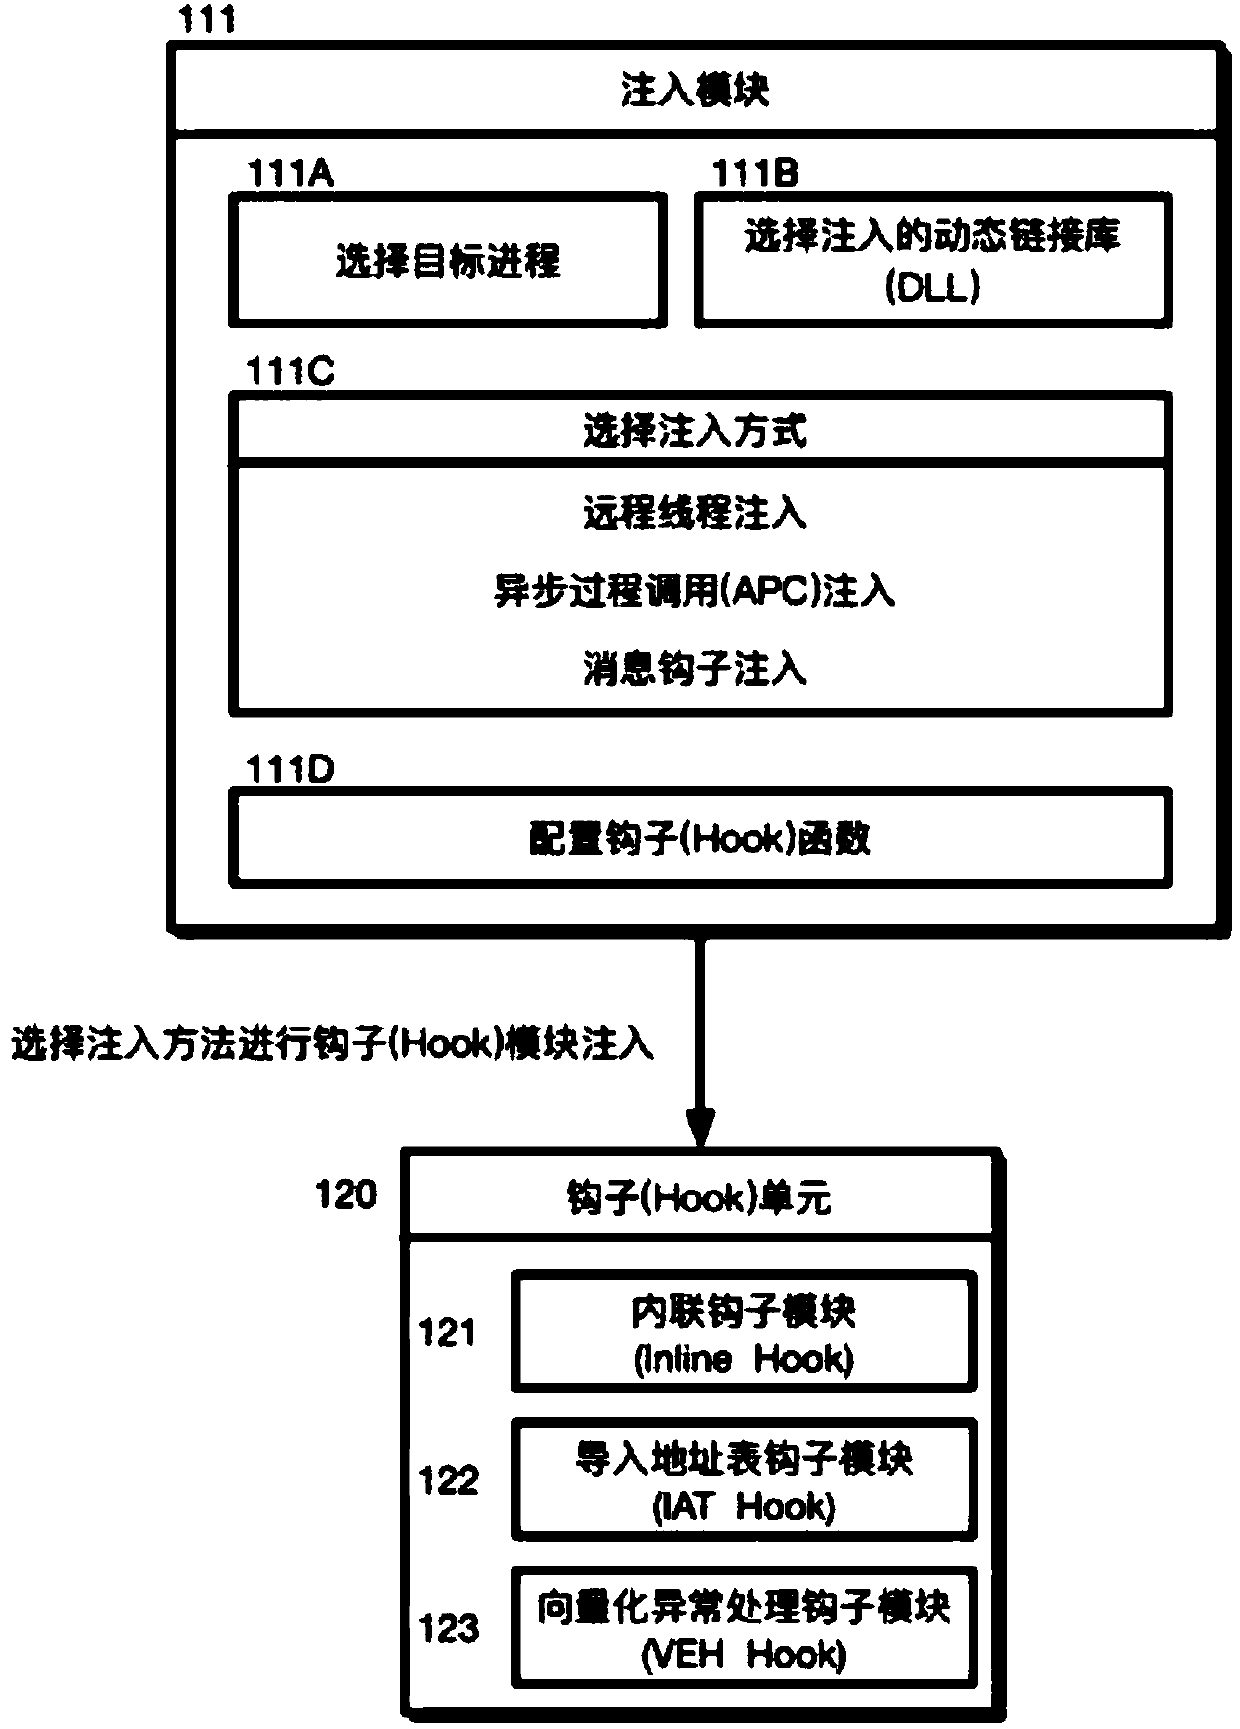 Configurable and integratable Hook system in Windows environment and method thereof